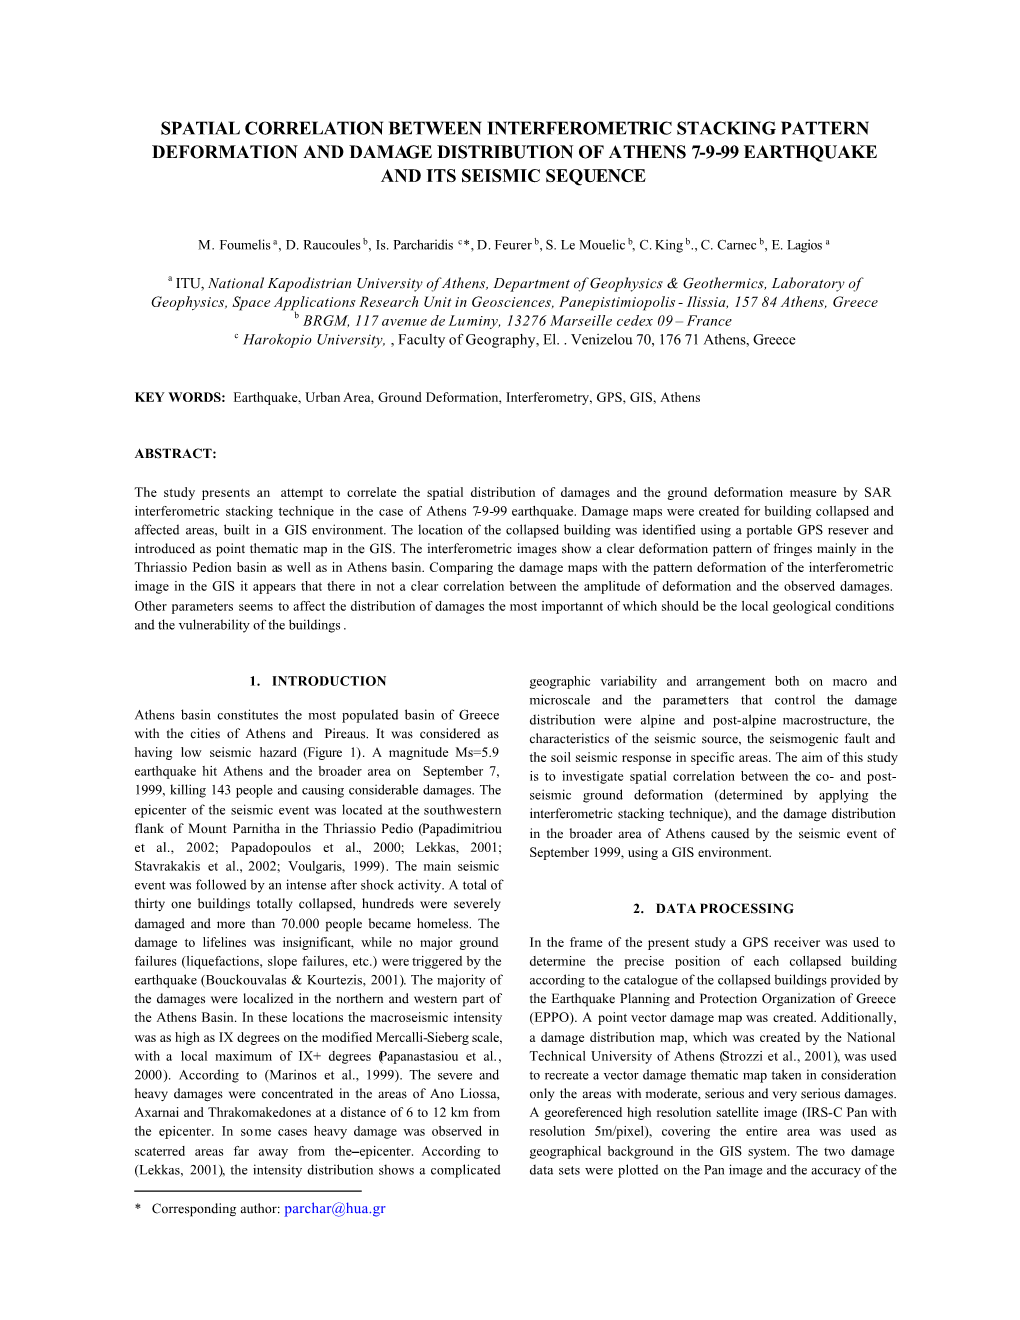 Spatial Correlation Between Interferometric Stacking Pattern Deformation and Damage Distribution of Athens 7-9-99 Earthquake and Its Seismic Sequence